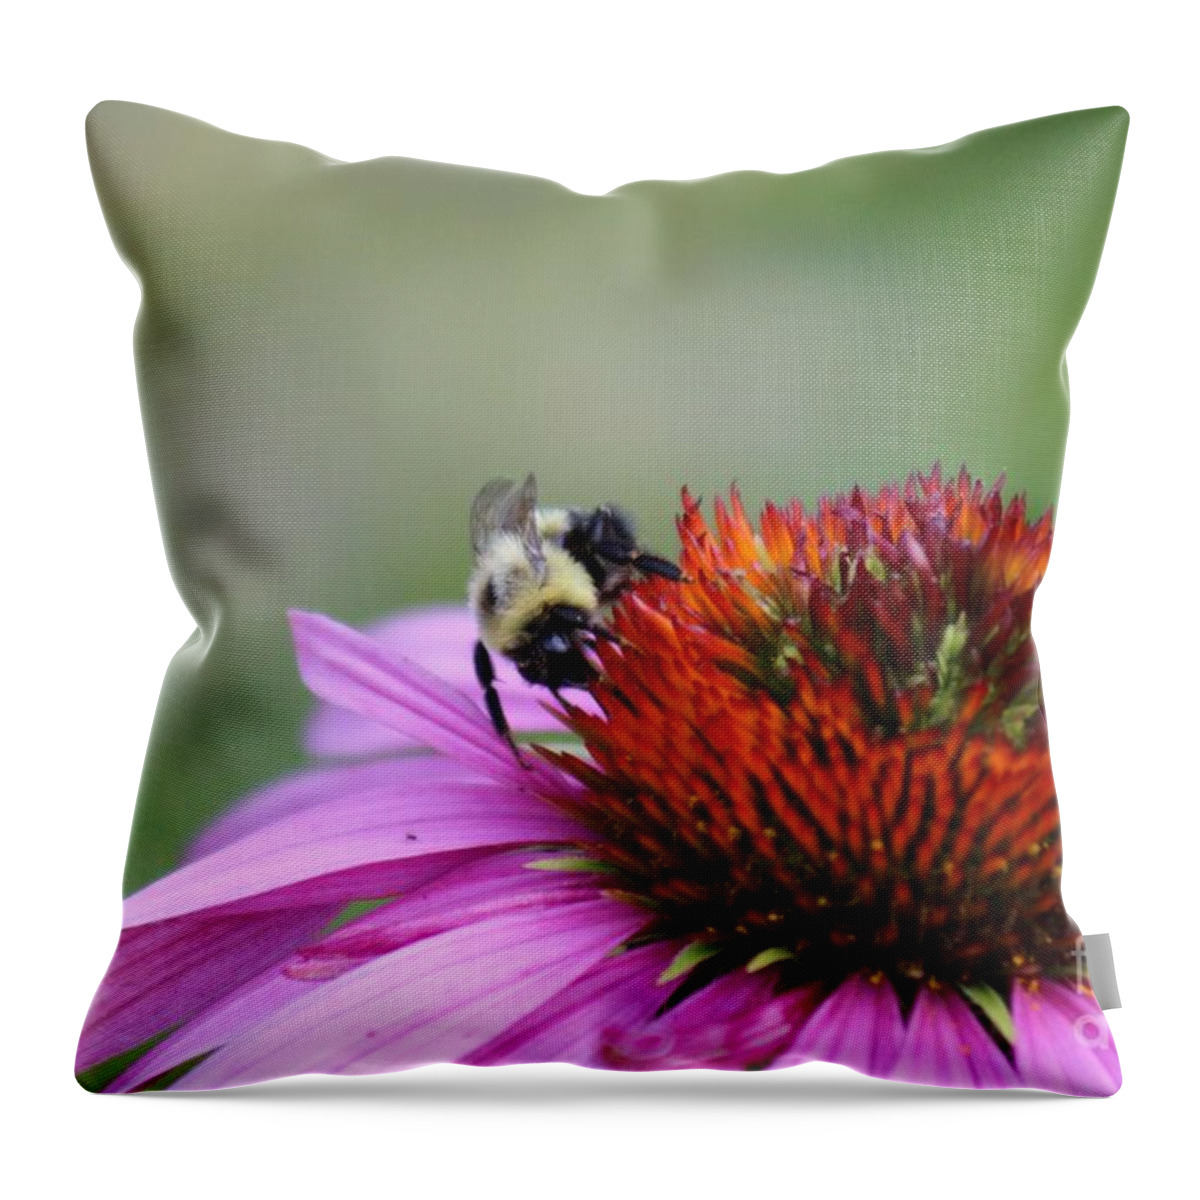 Pink Throw Pillow featuring the photograph Nature's Beauty 76 by Deena Withycombe